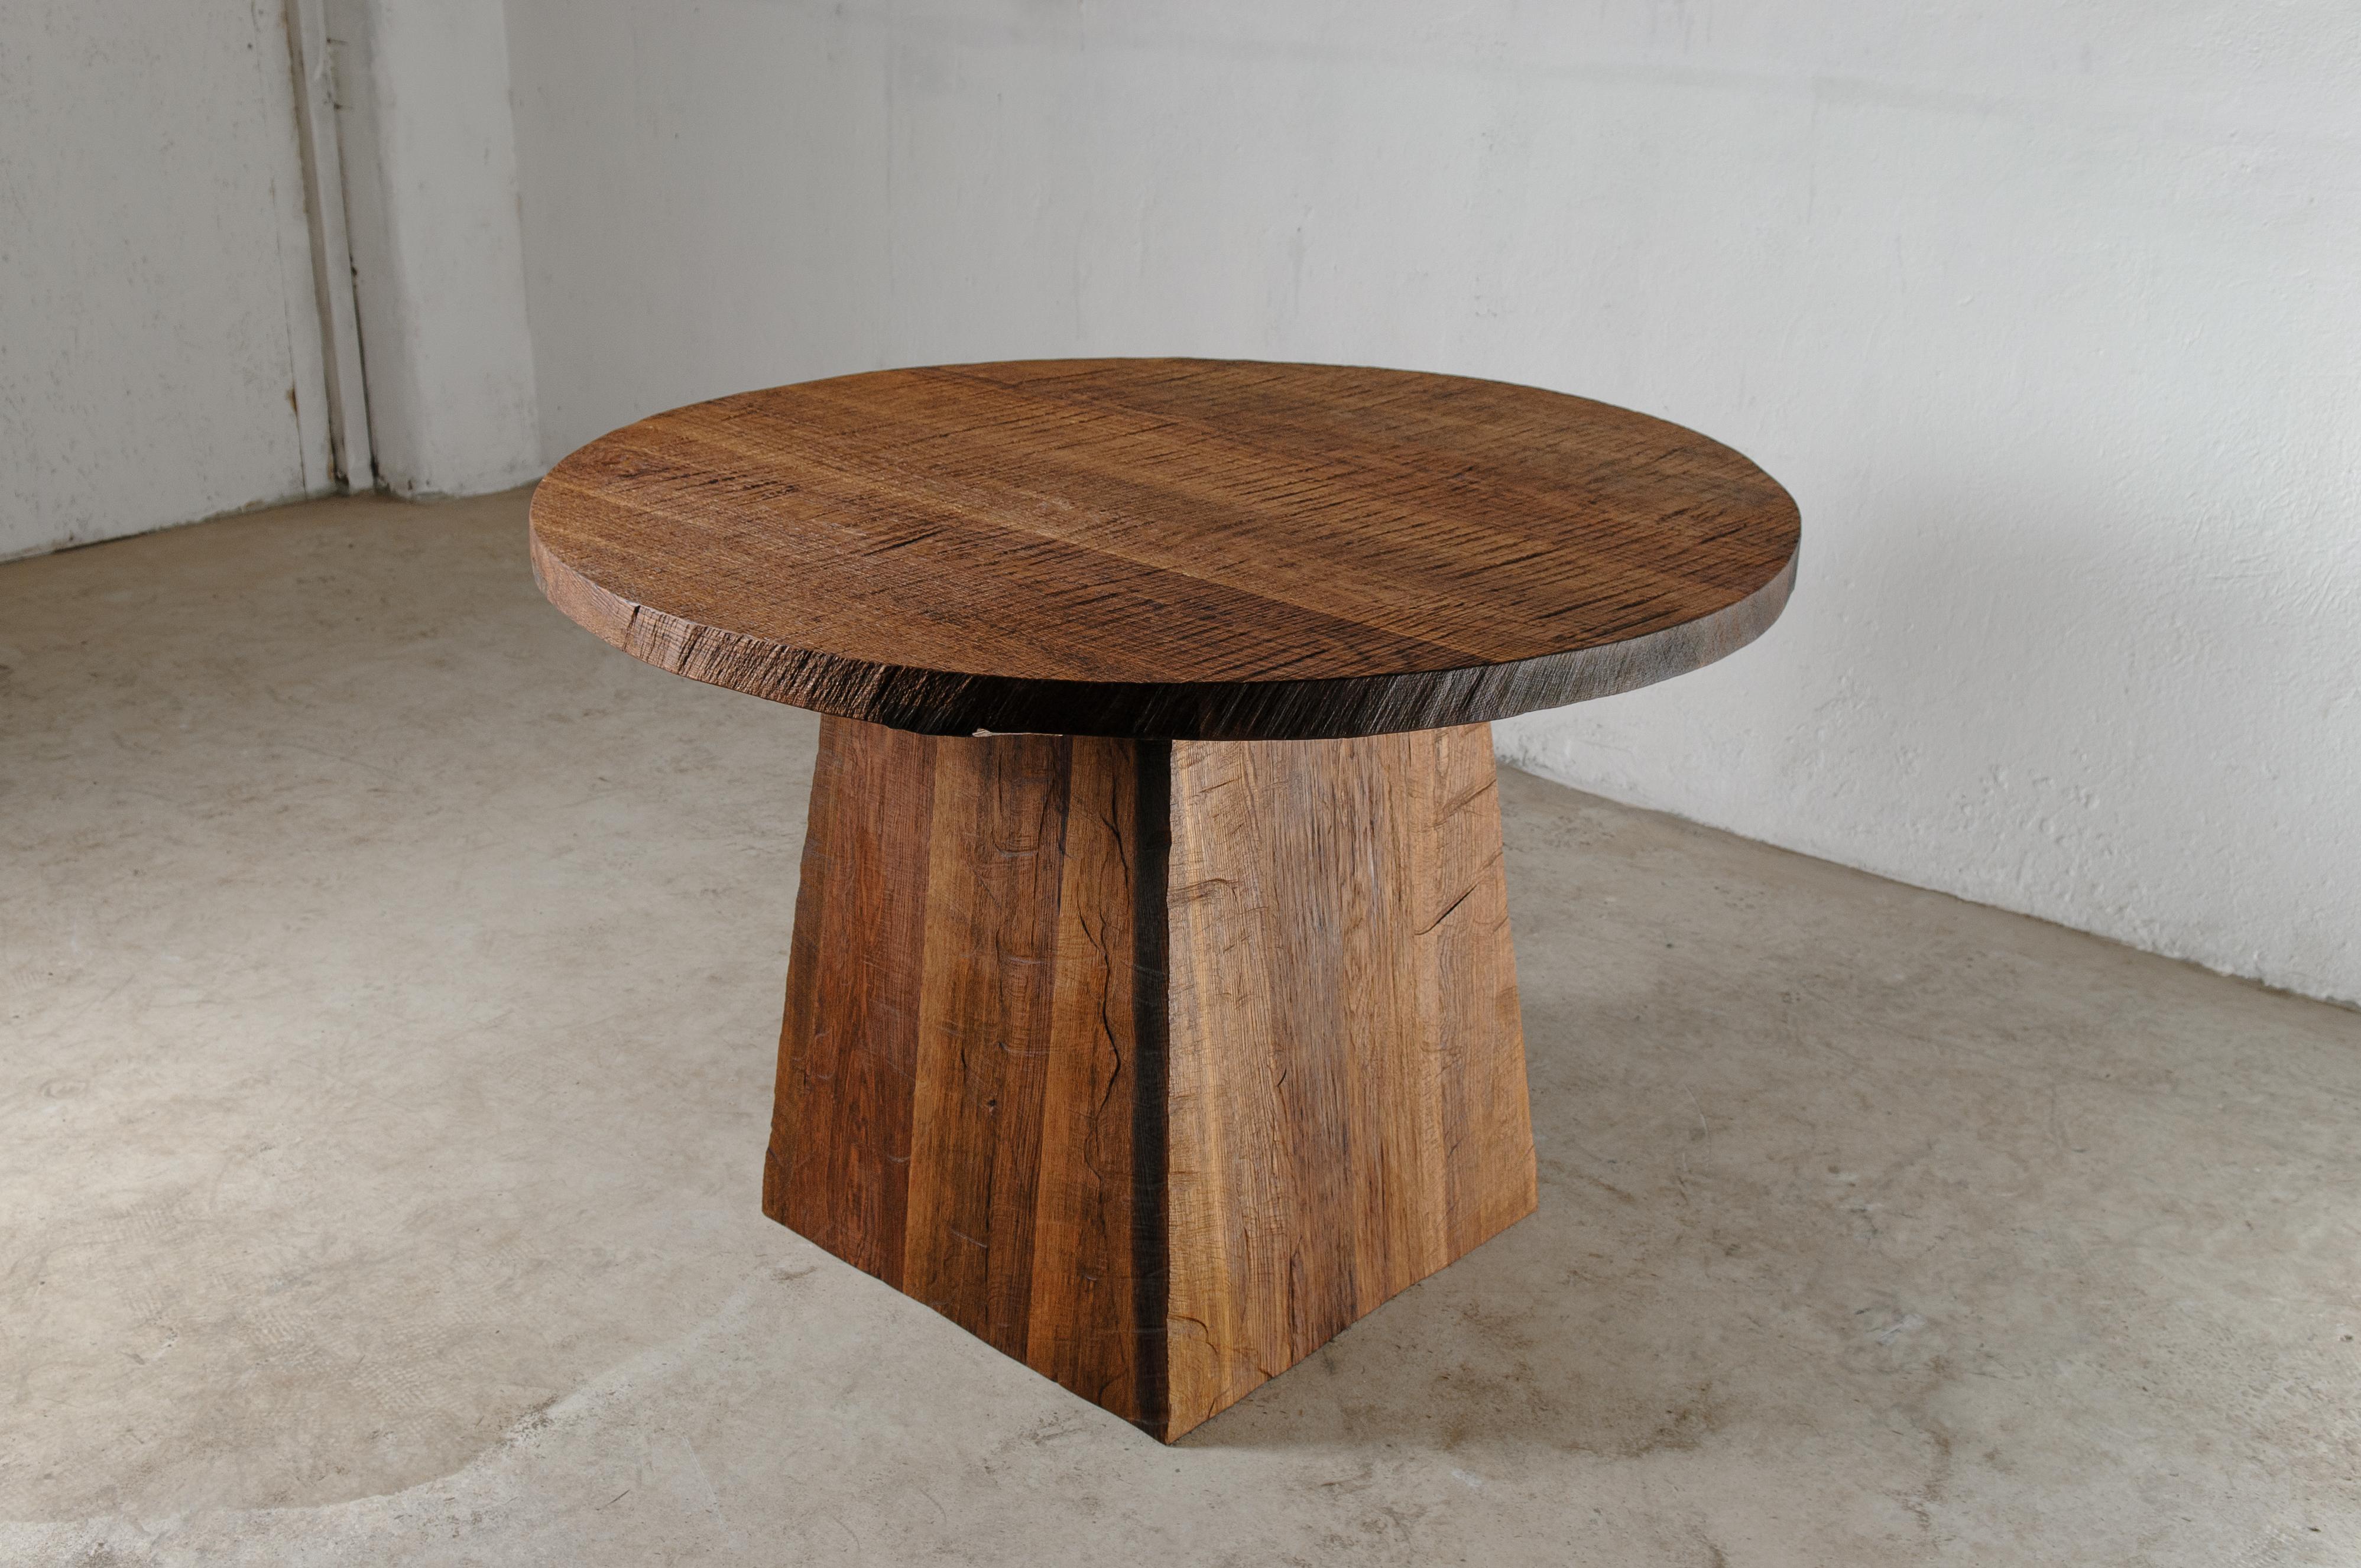 Brutalist center table N1 in solid oakwood.

Dimensions: 
D. 150 x H. 76 cm

Unique piece made to order.

Founded by artist Denis Milovanov, SÓHA design studio conceives and produces furniture design and decorative objects in solid oak in an